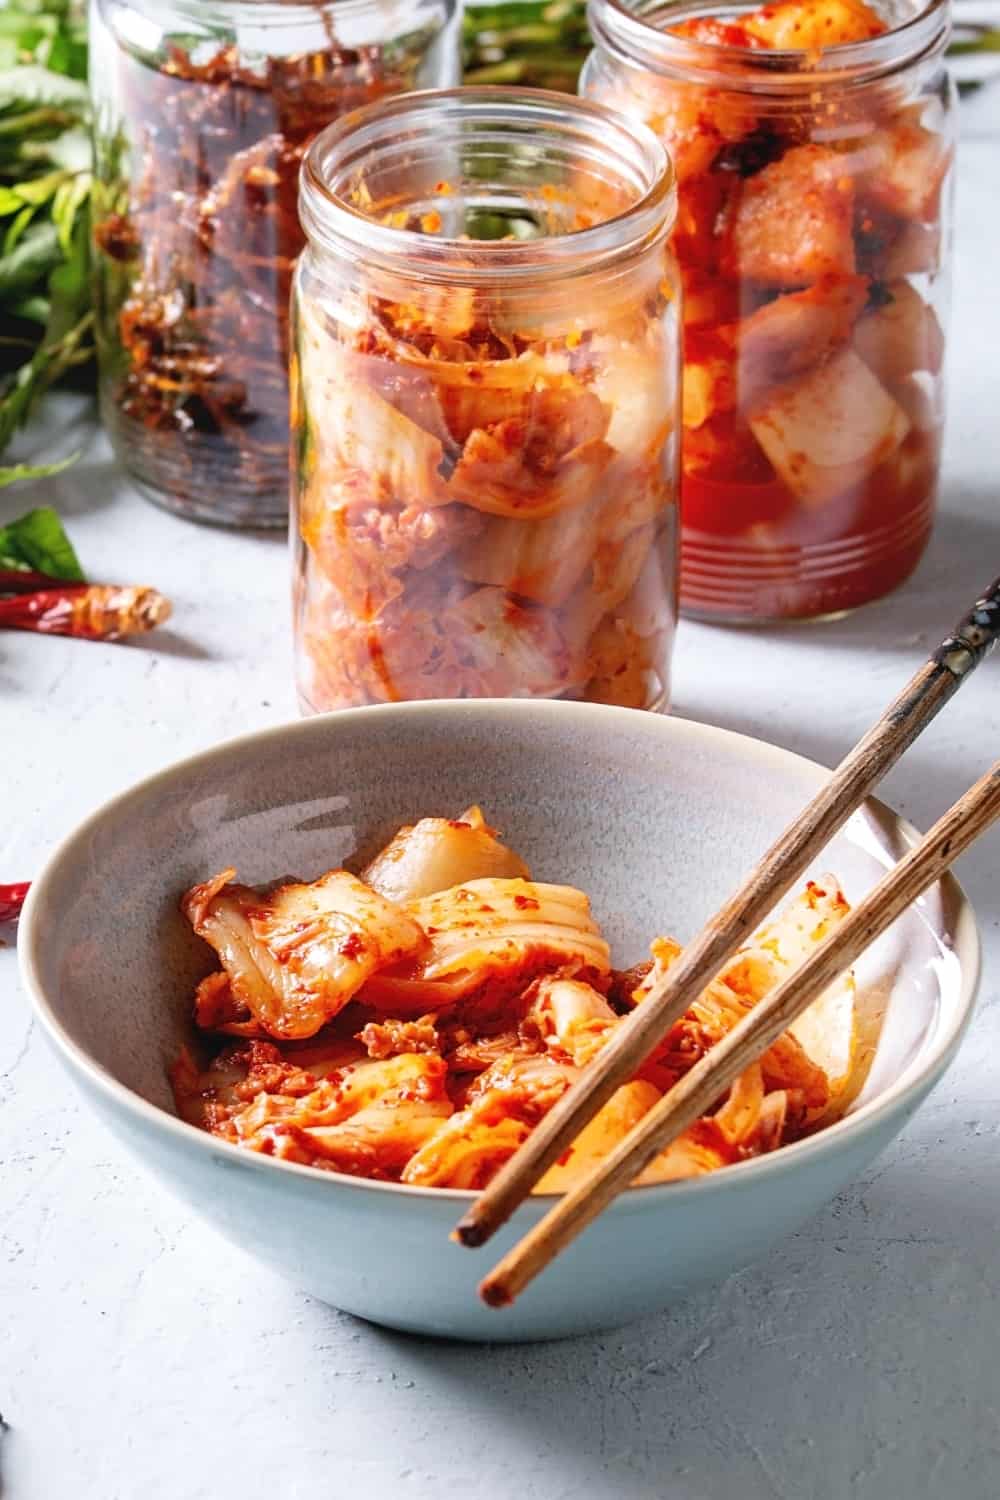 Korean traditional fermented appetizer kimchi cabbage and radish salad